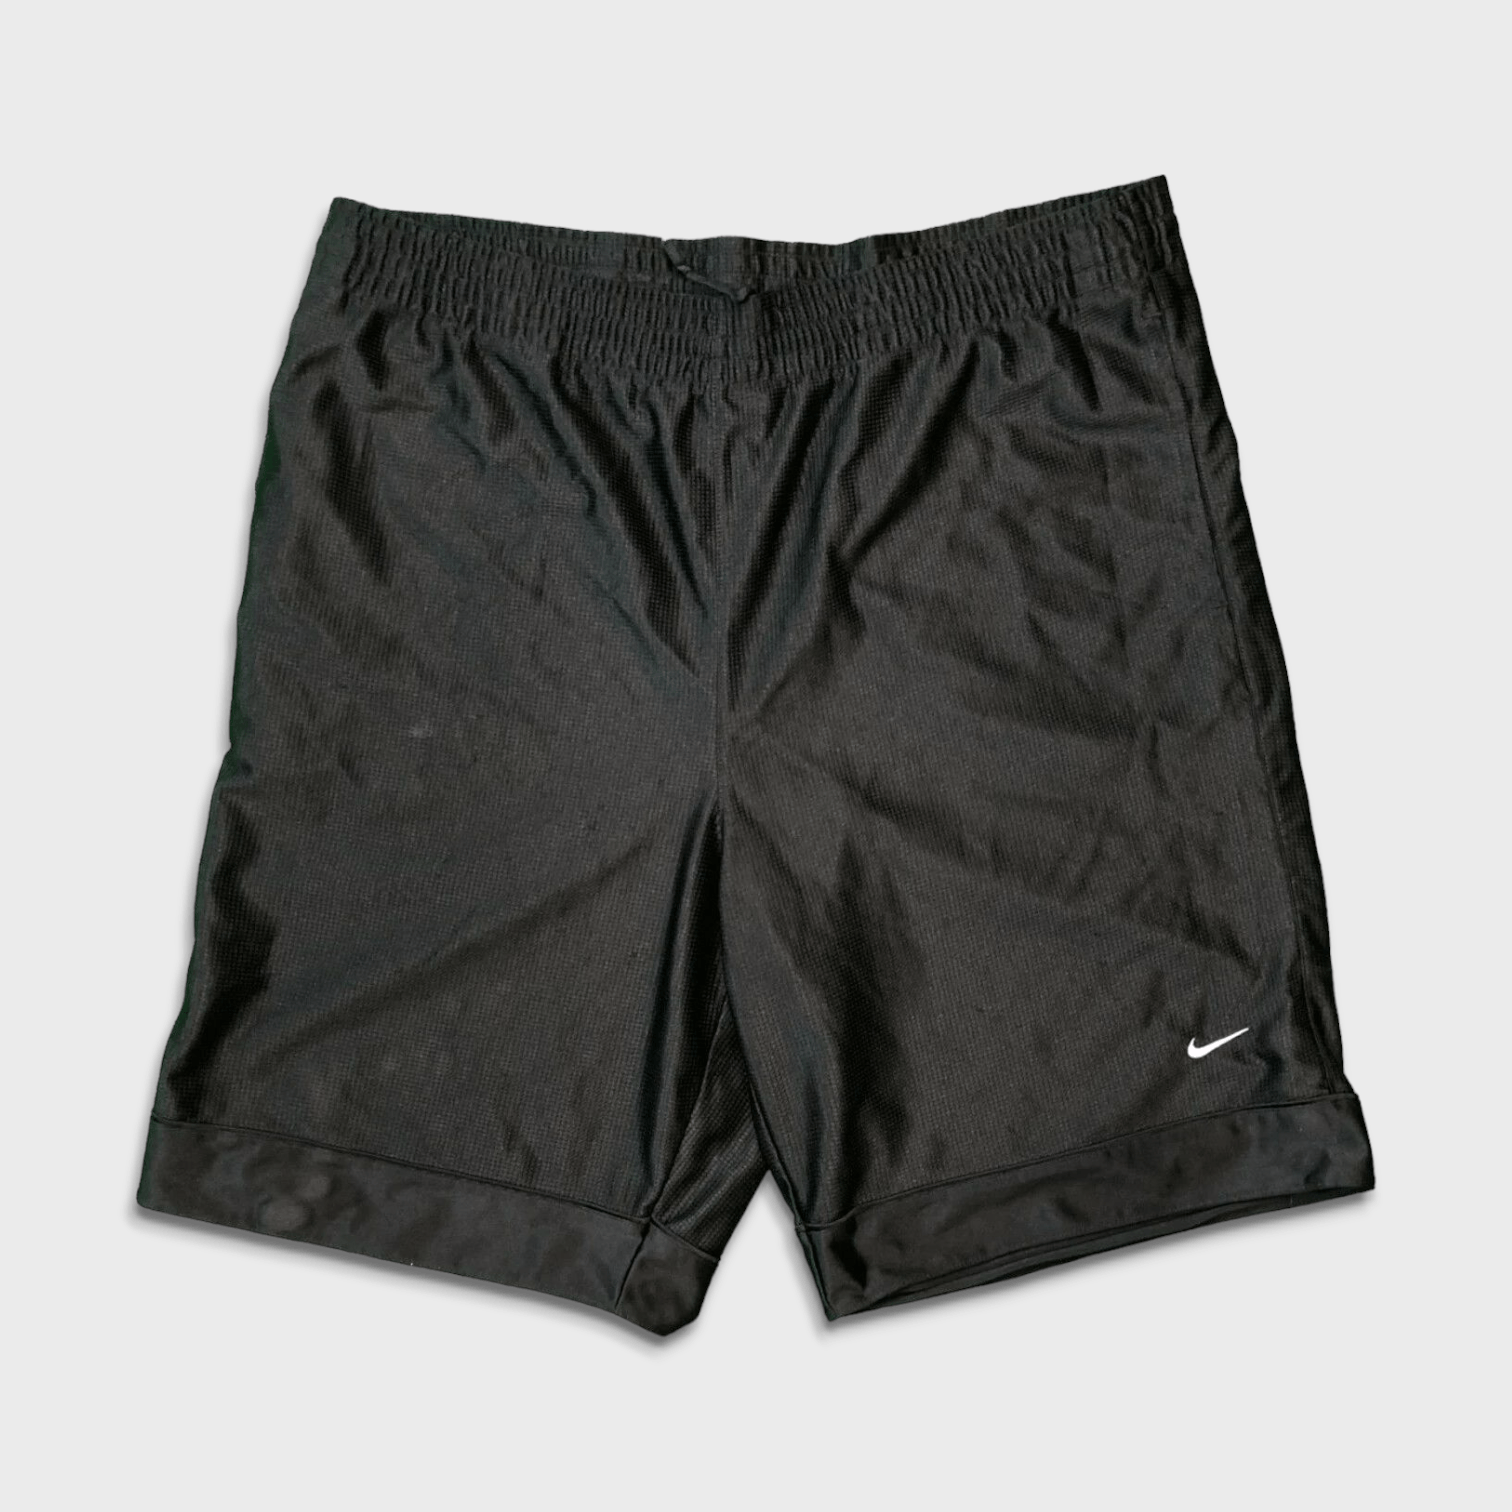 Nike Vintage Y2K Nike Mens Swoosh Pocketed Classic Shorts Large Size US 38 / EU 54 - 1 Preview